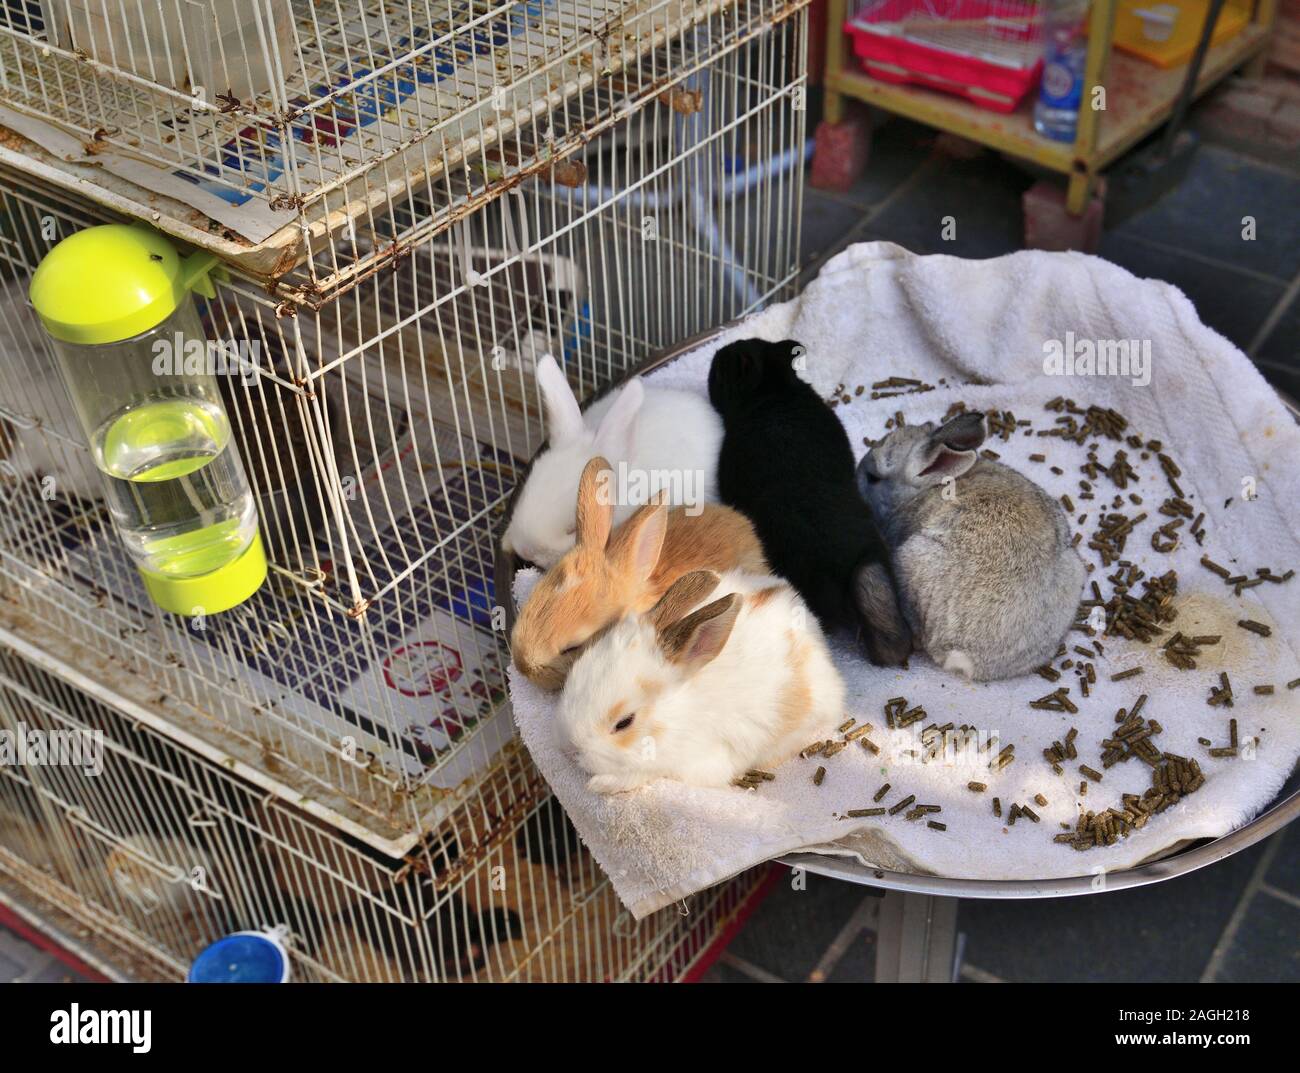 Doha, Qatar. Selling chinchillas on Souq Waqif - marketplace for selling traditional garments. Stock Photo